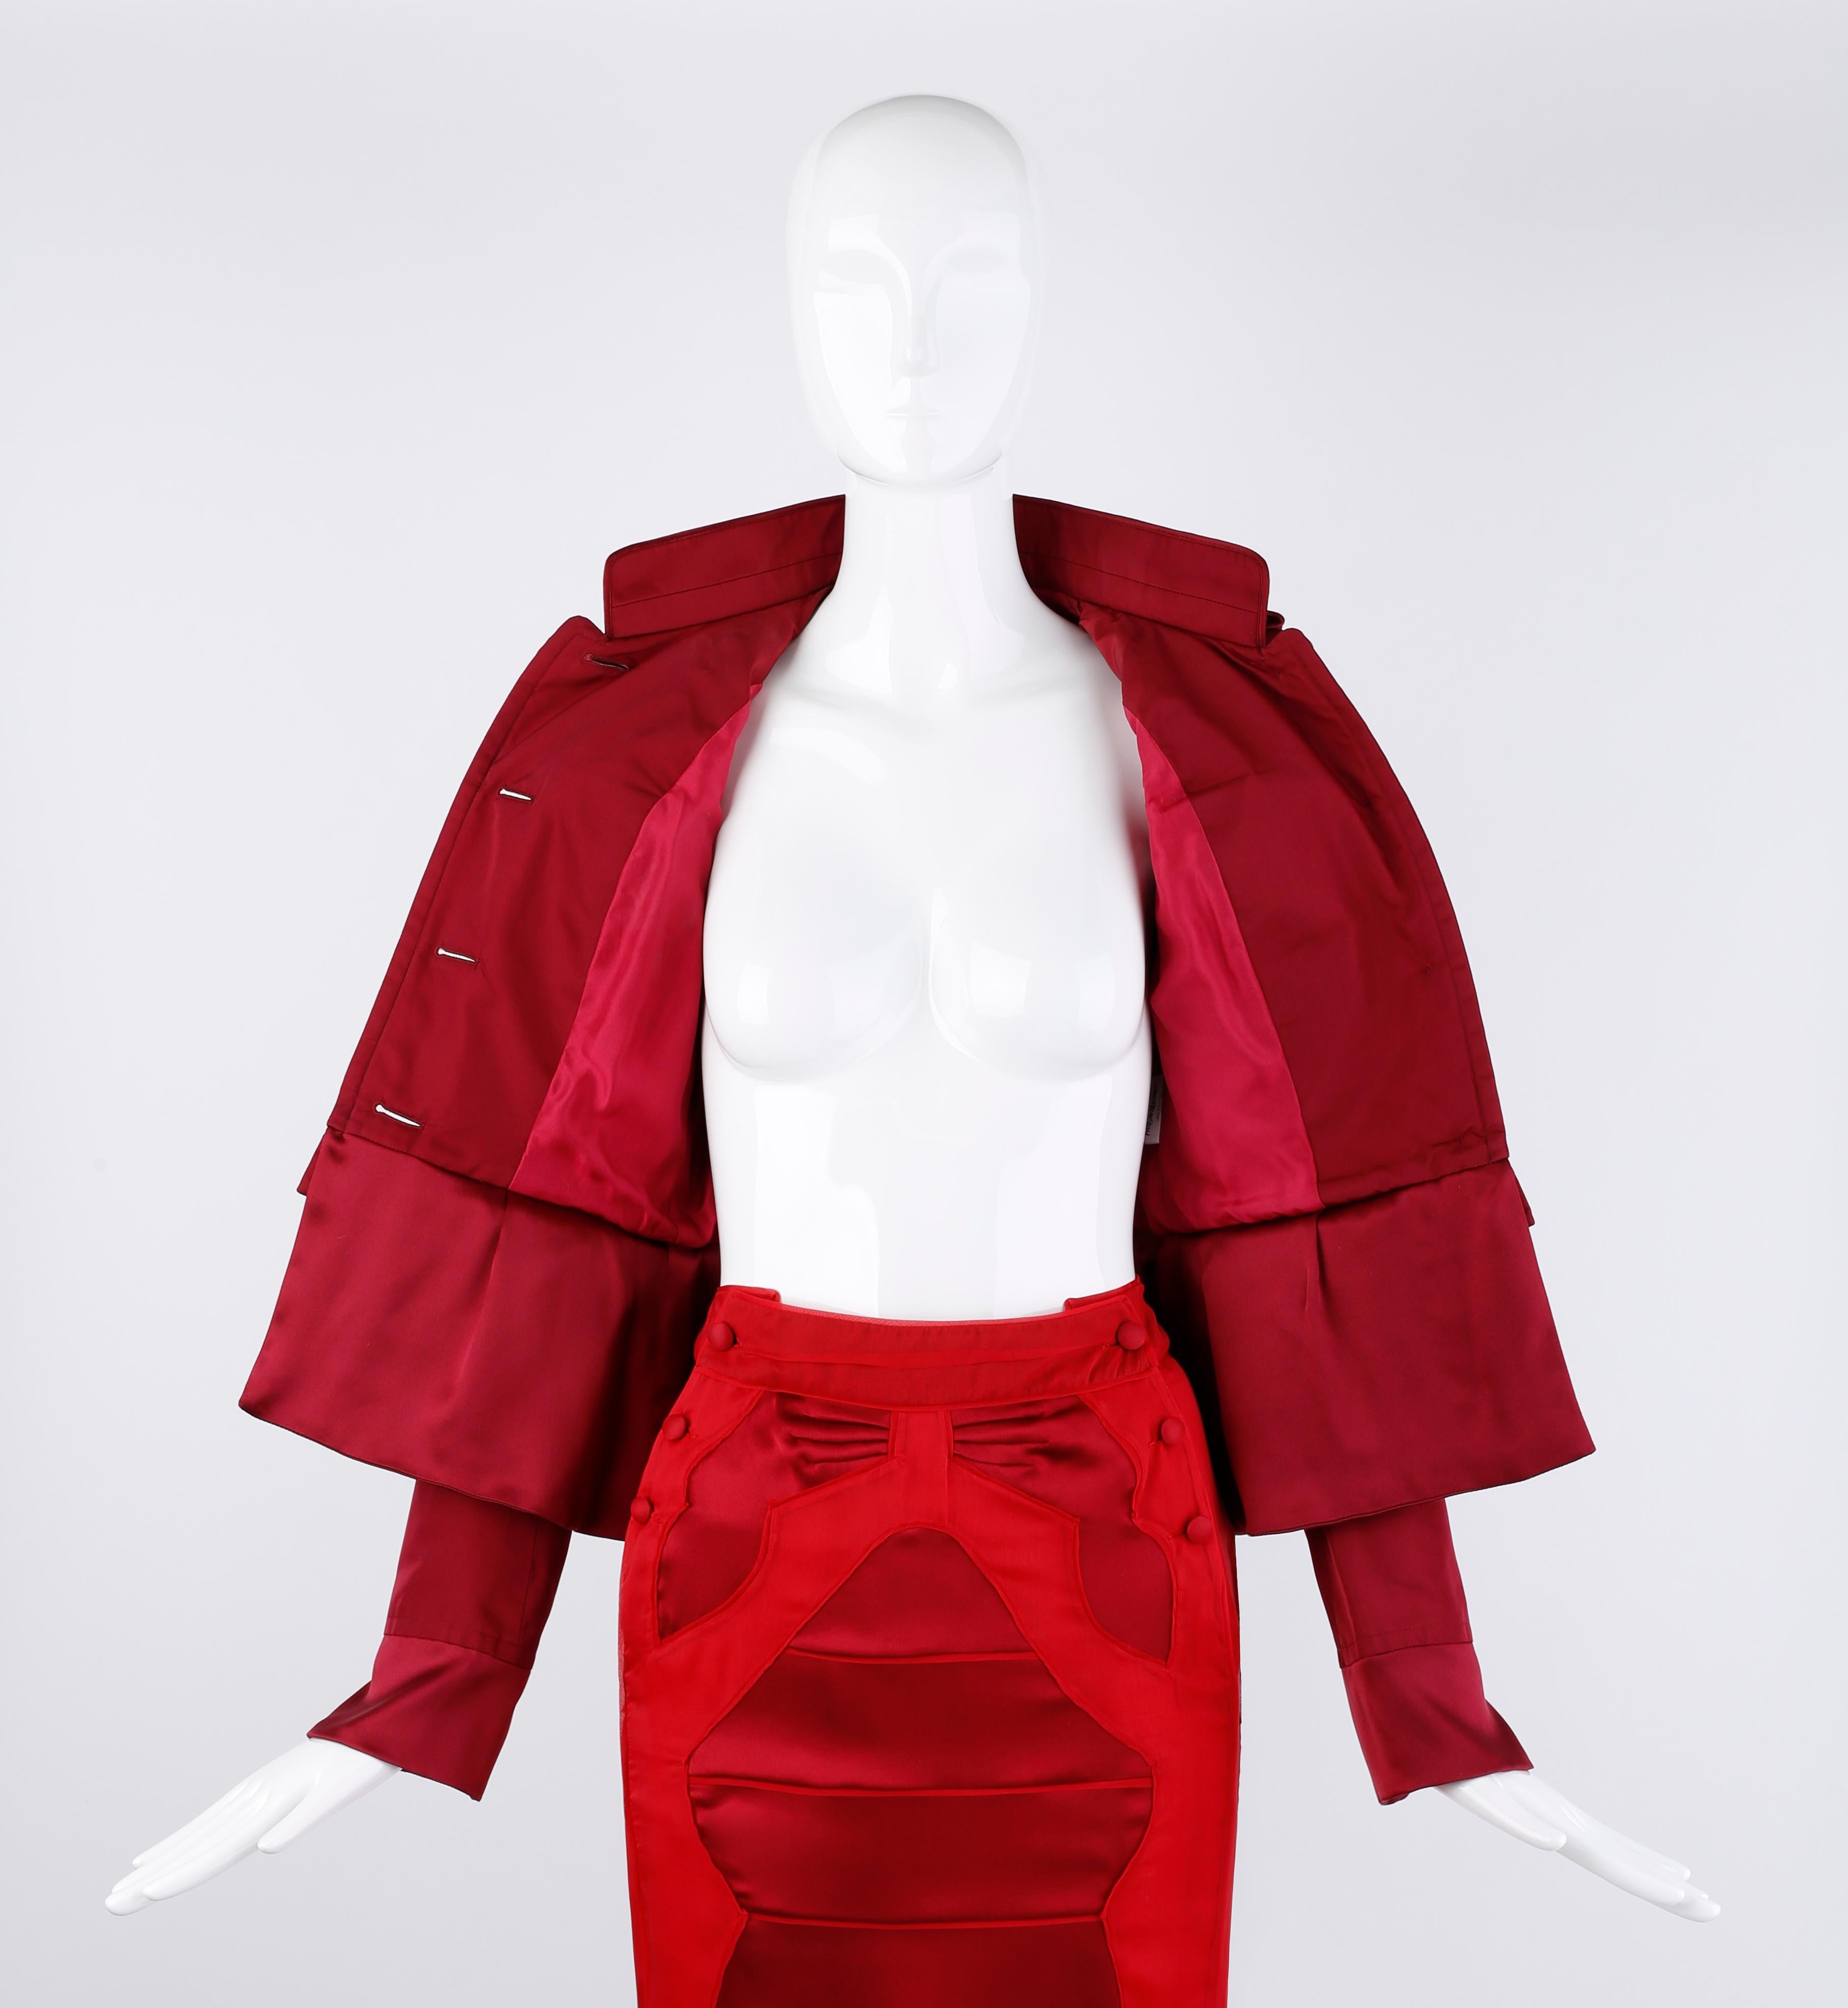 Yves Saint Laurent Tom Ford F/W 2004 Red Maroon Silk Evening Jacket & Skirt Suit For Sale 3